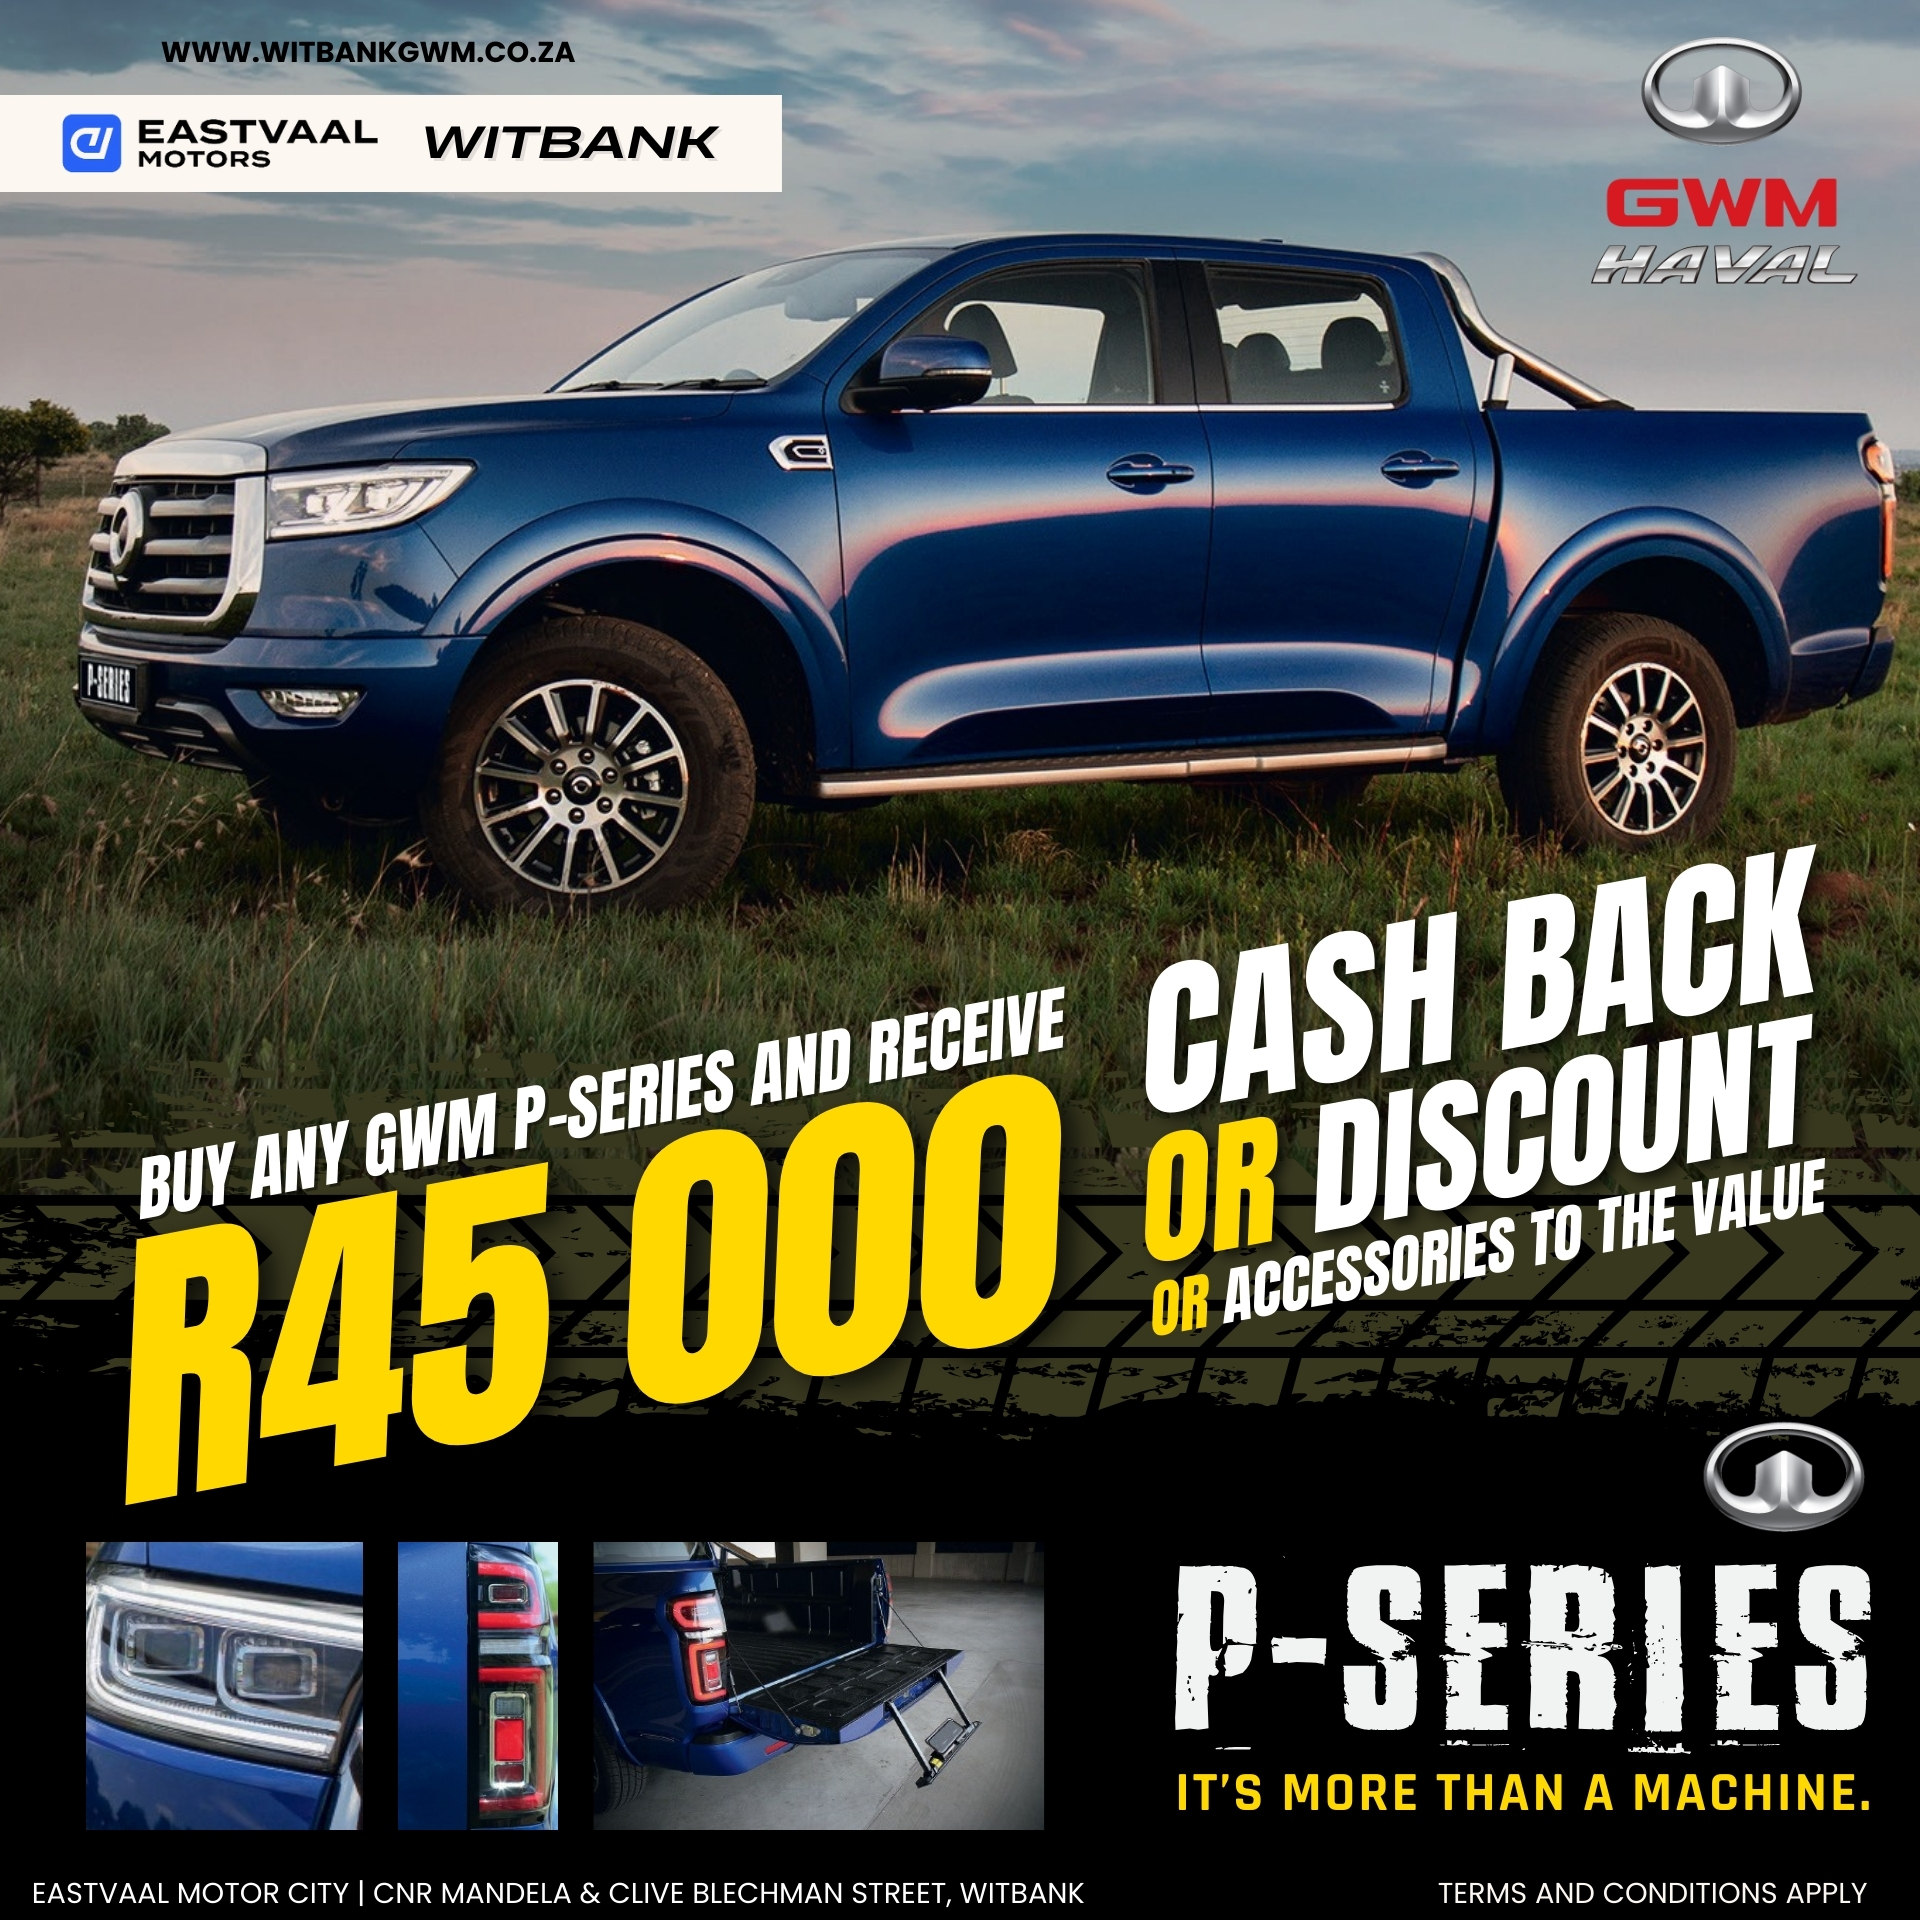 Buy any GWM P-Series this April image from 